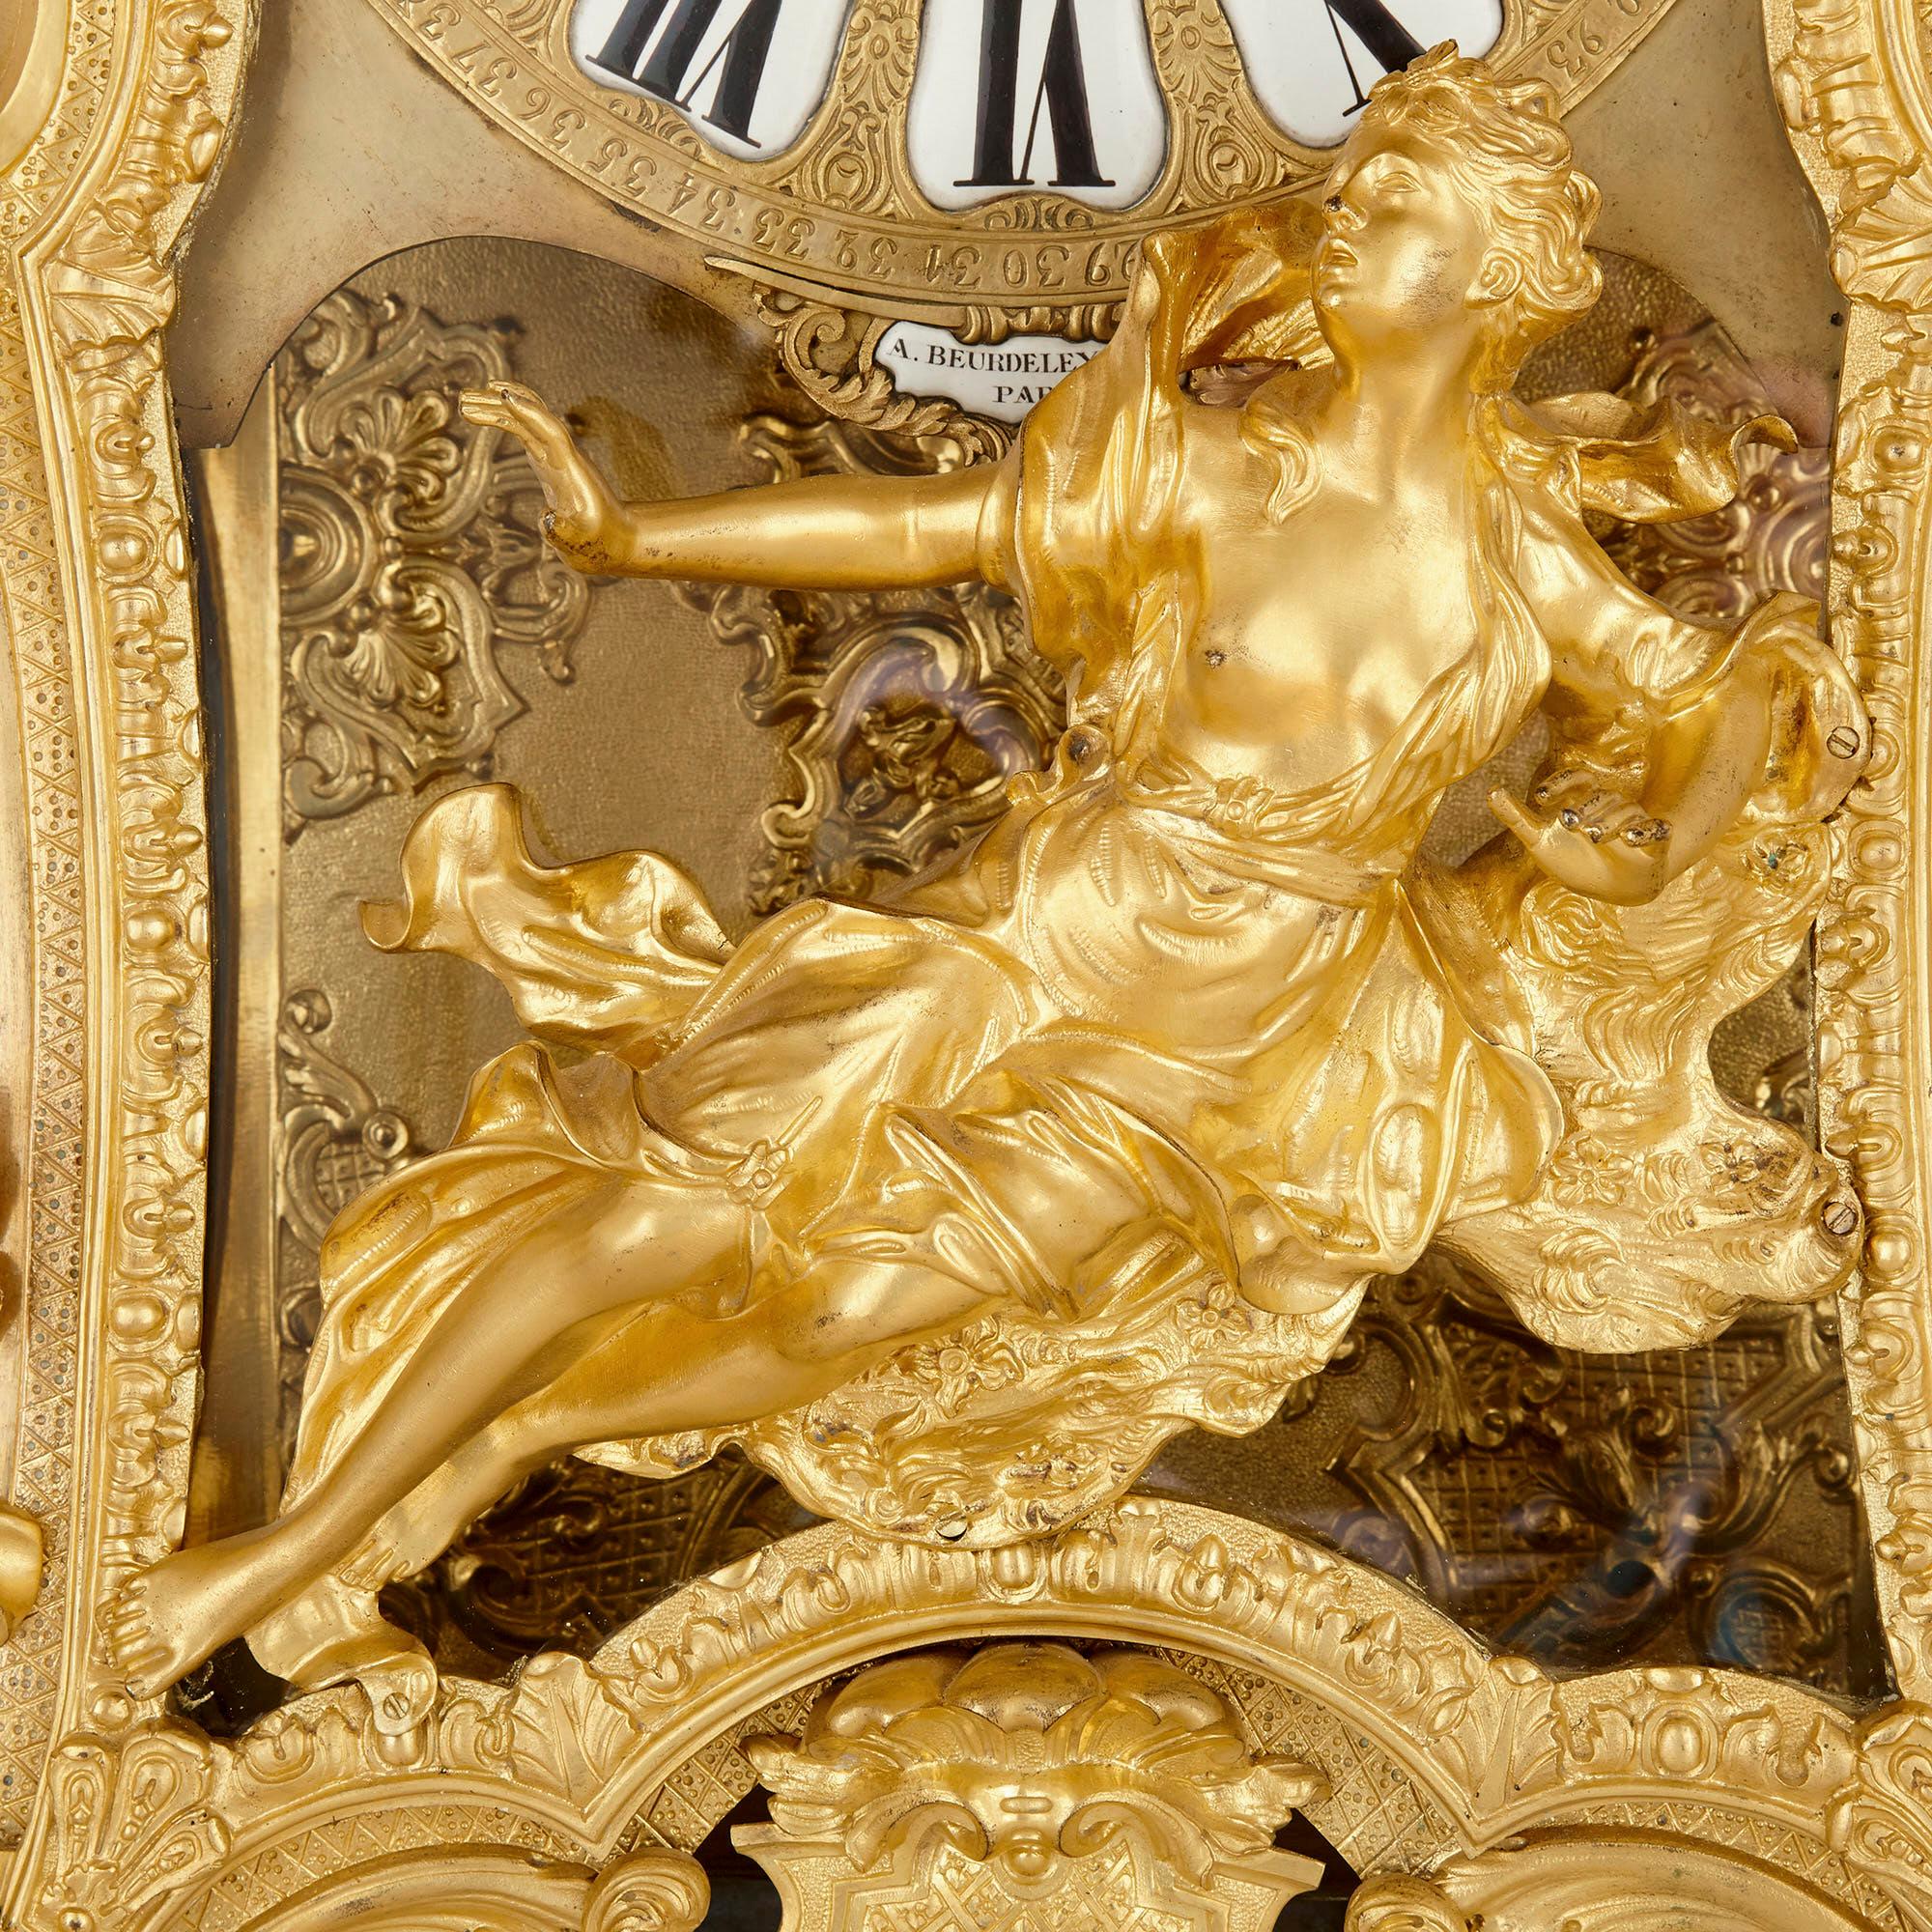 Very Large Louis XV Style Gilt Bronze Mantel Clock by Beurdeley In Good Condition For Sale In London, GB